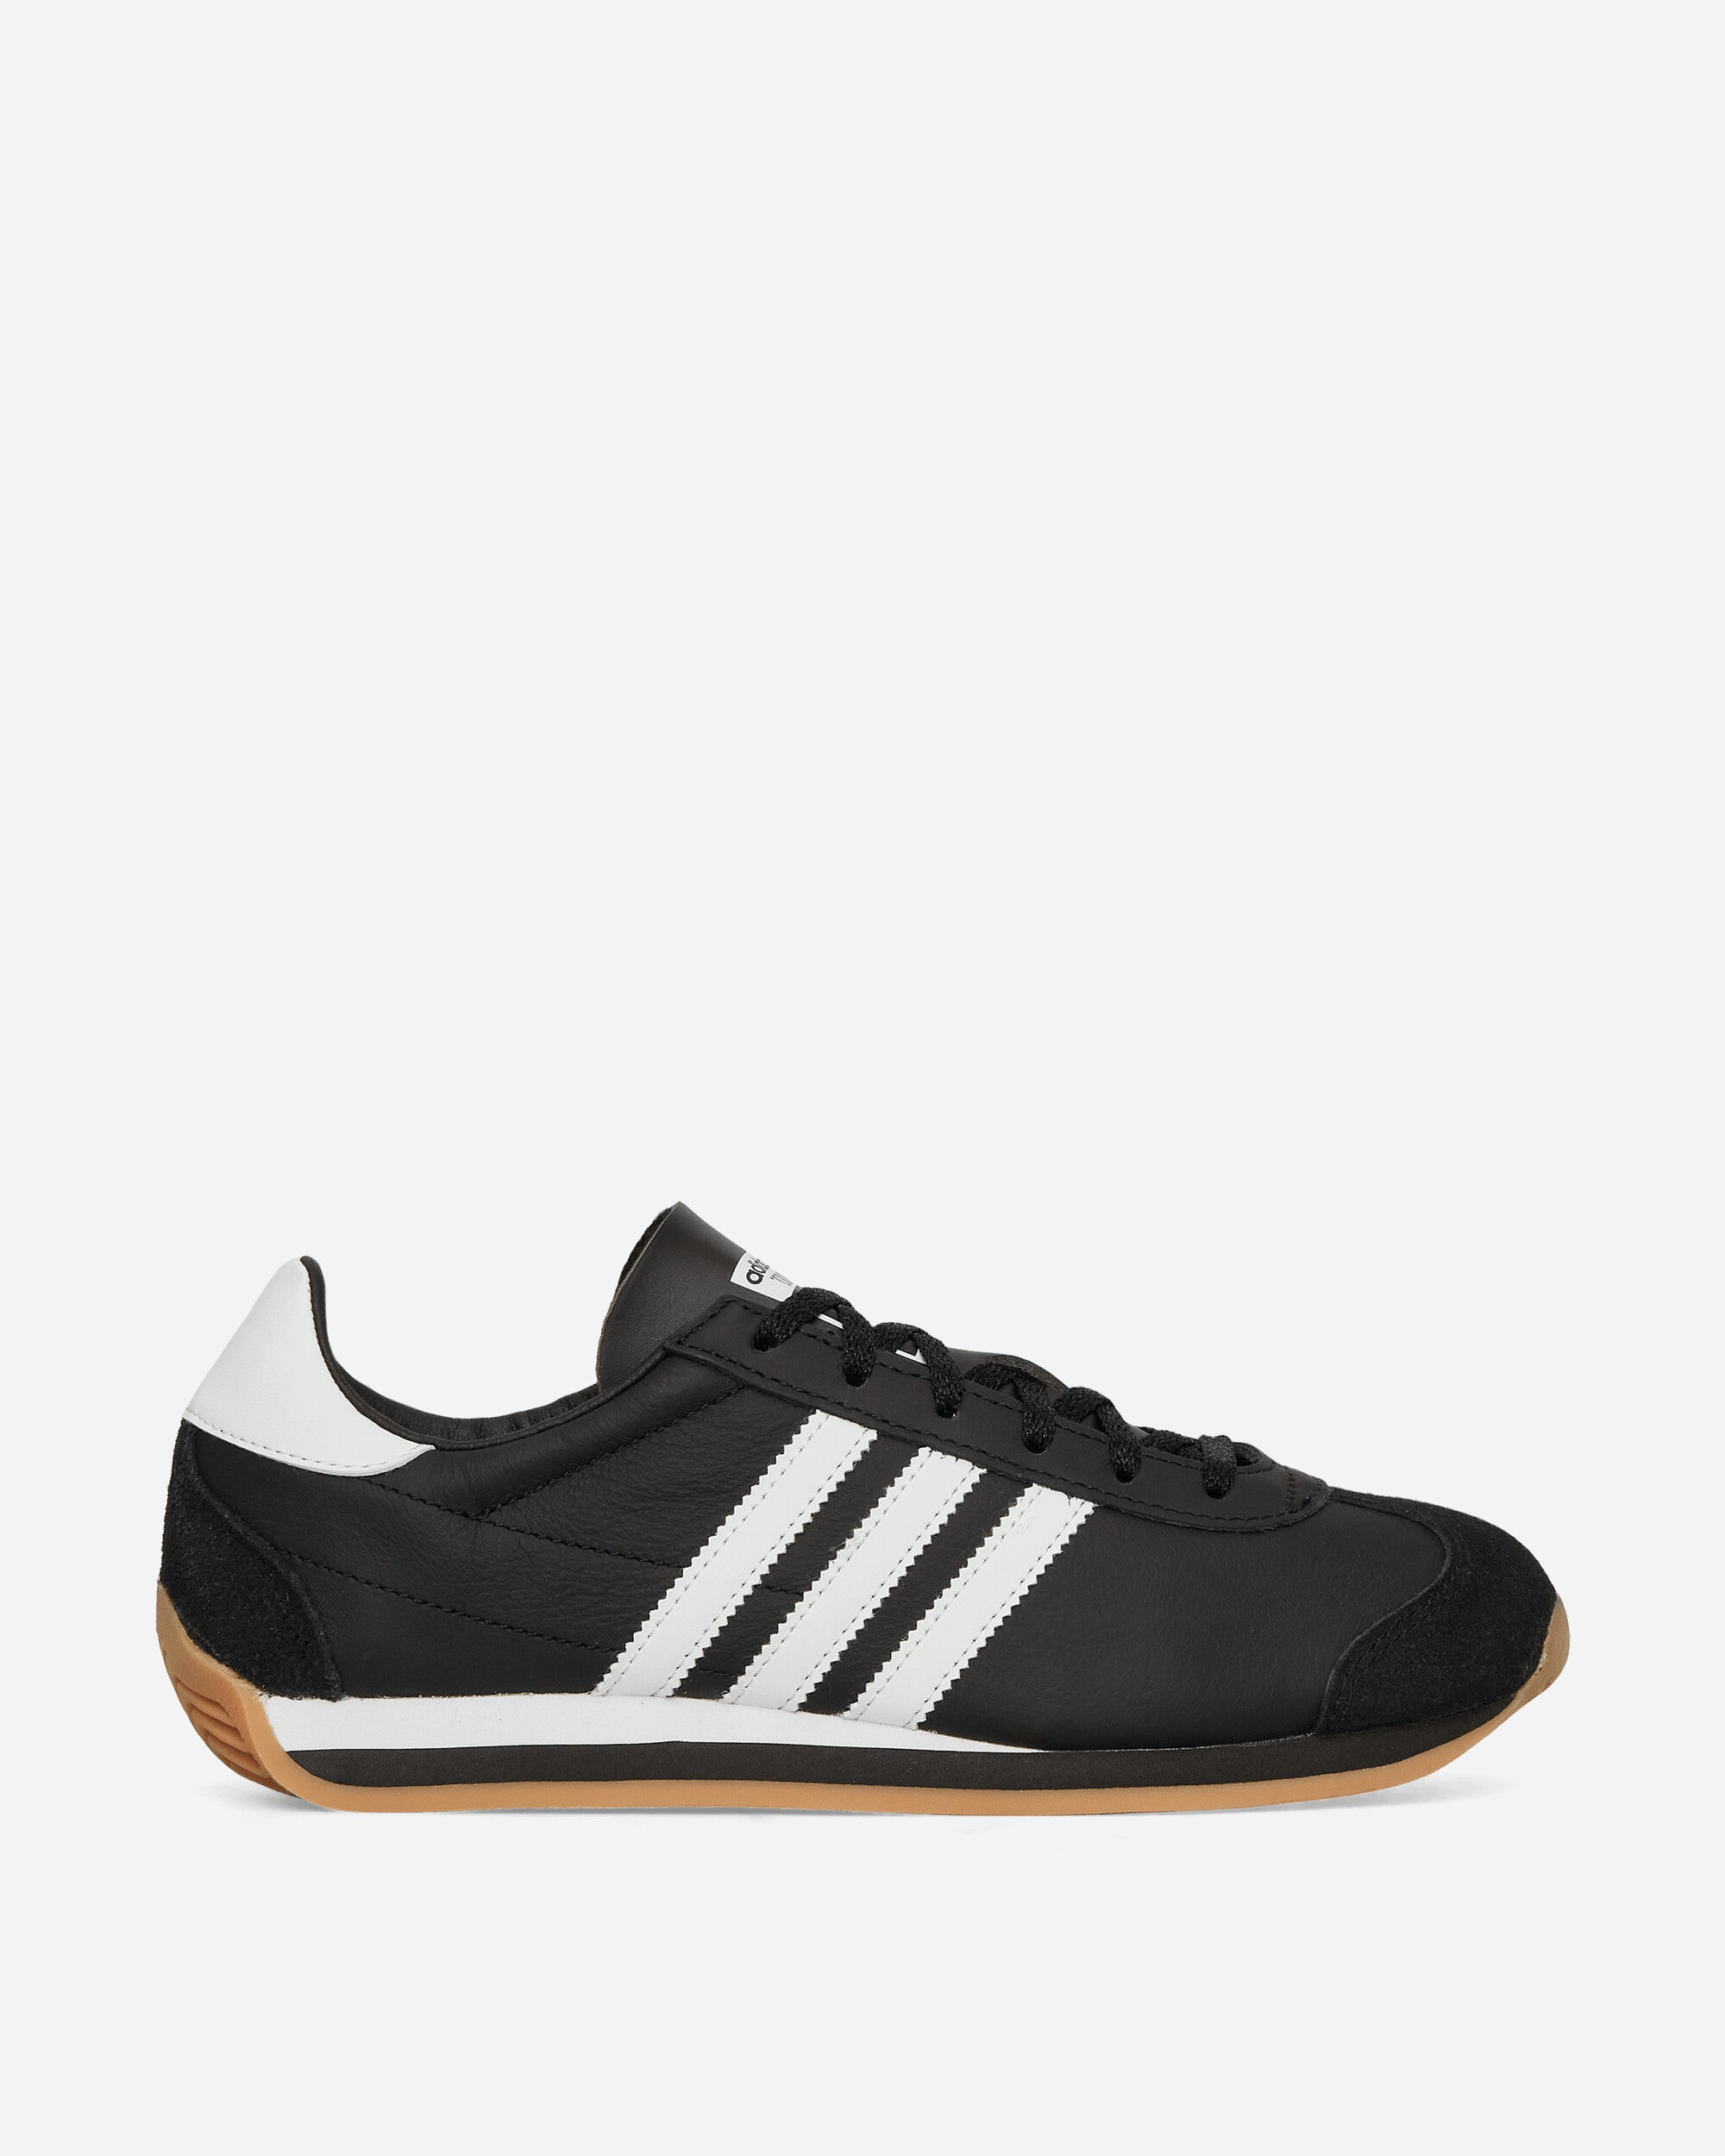 adidas Country OG Sneakers Black / White - Official Store